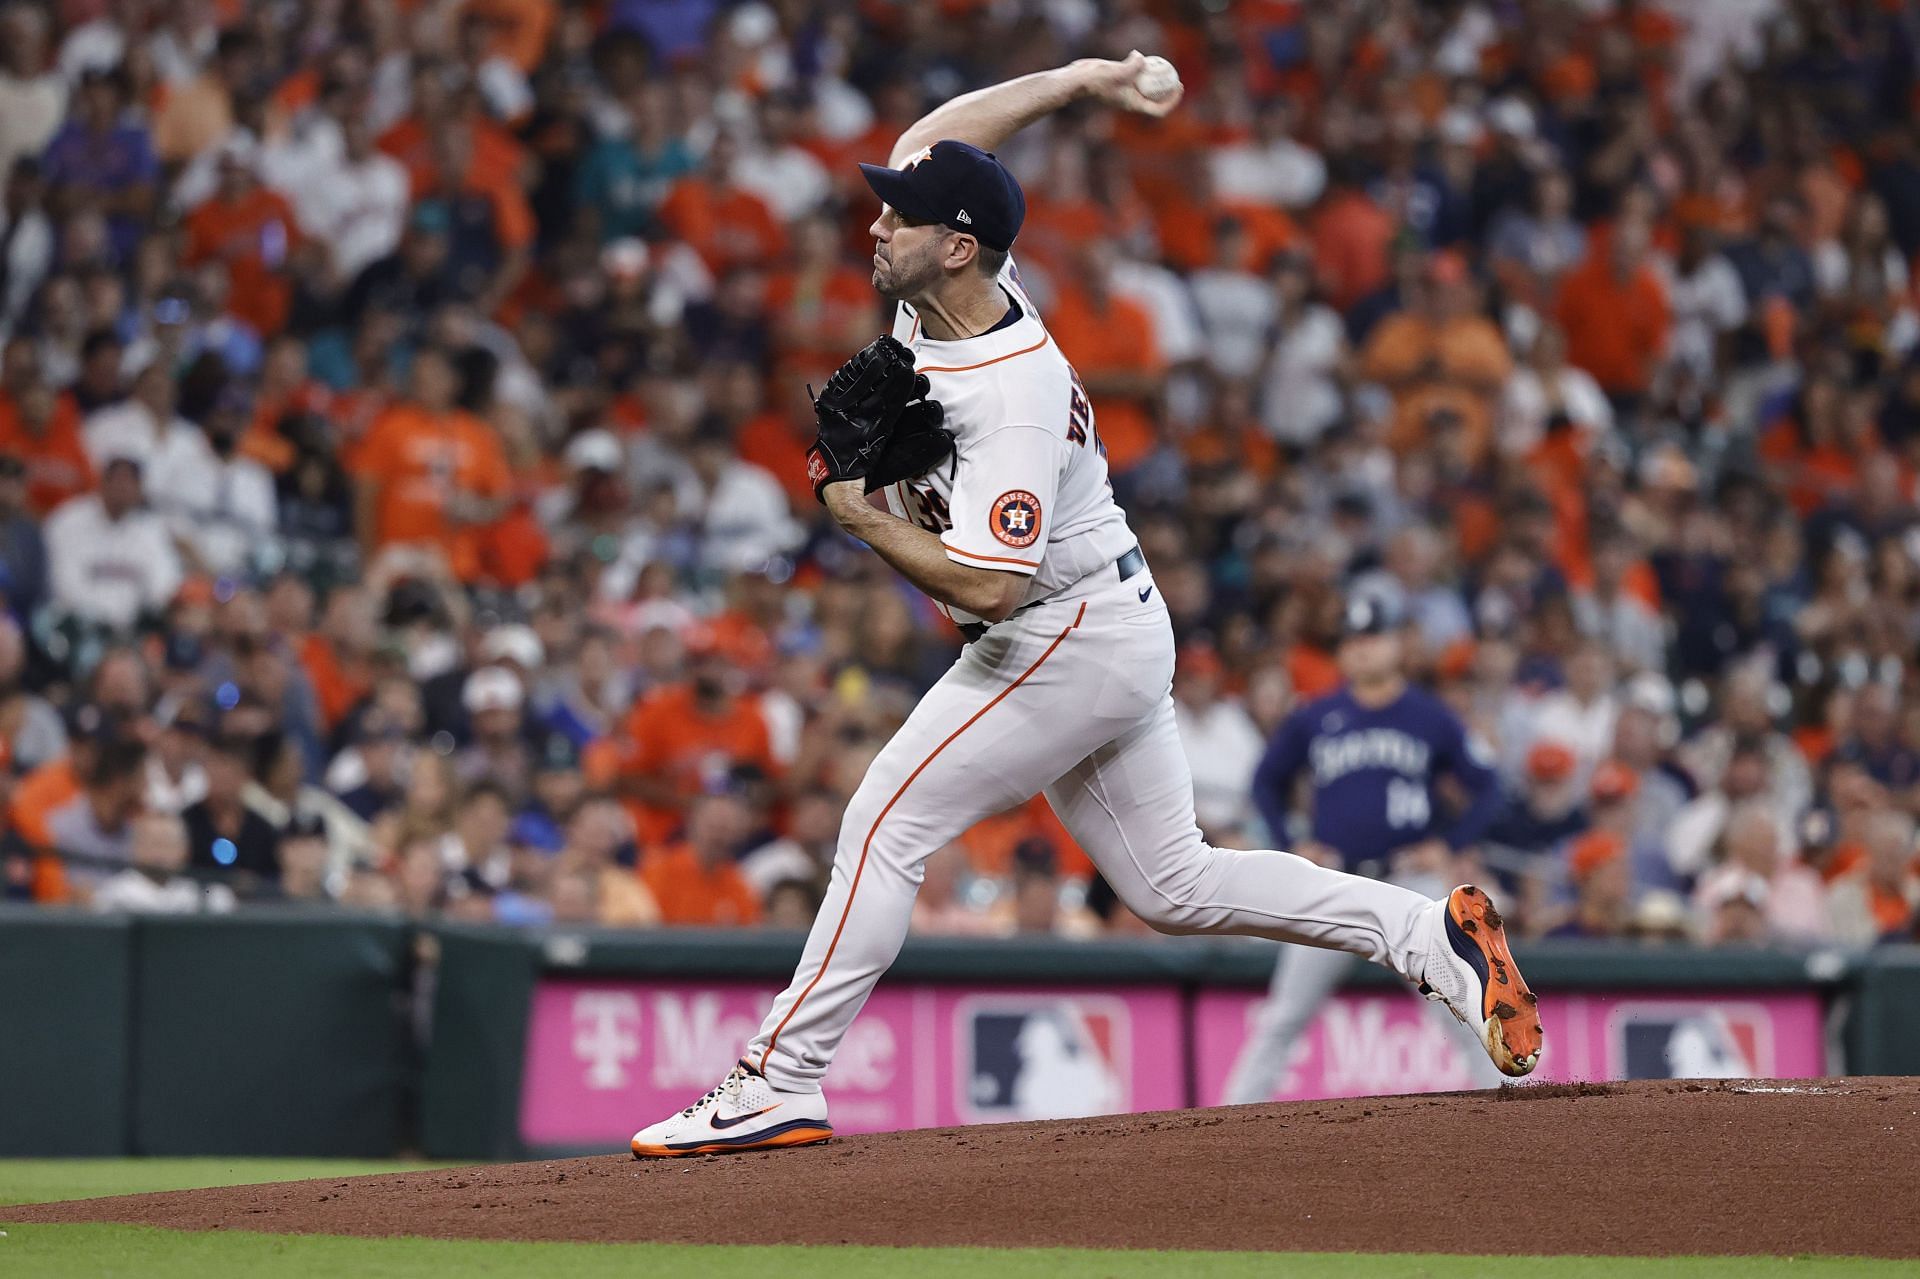 Phil Maton's curveball is helping him become a key piece in Astros' bullpen  - The Crawfish Boxes